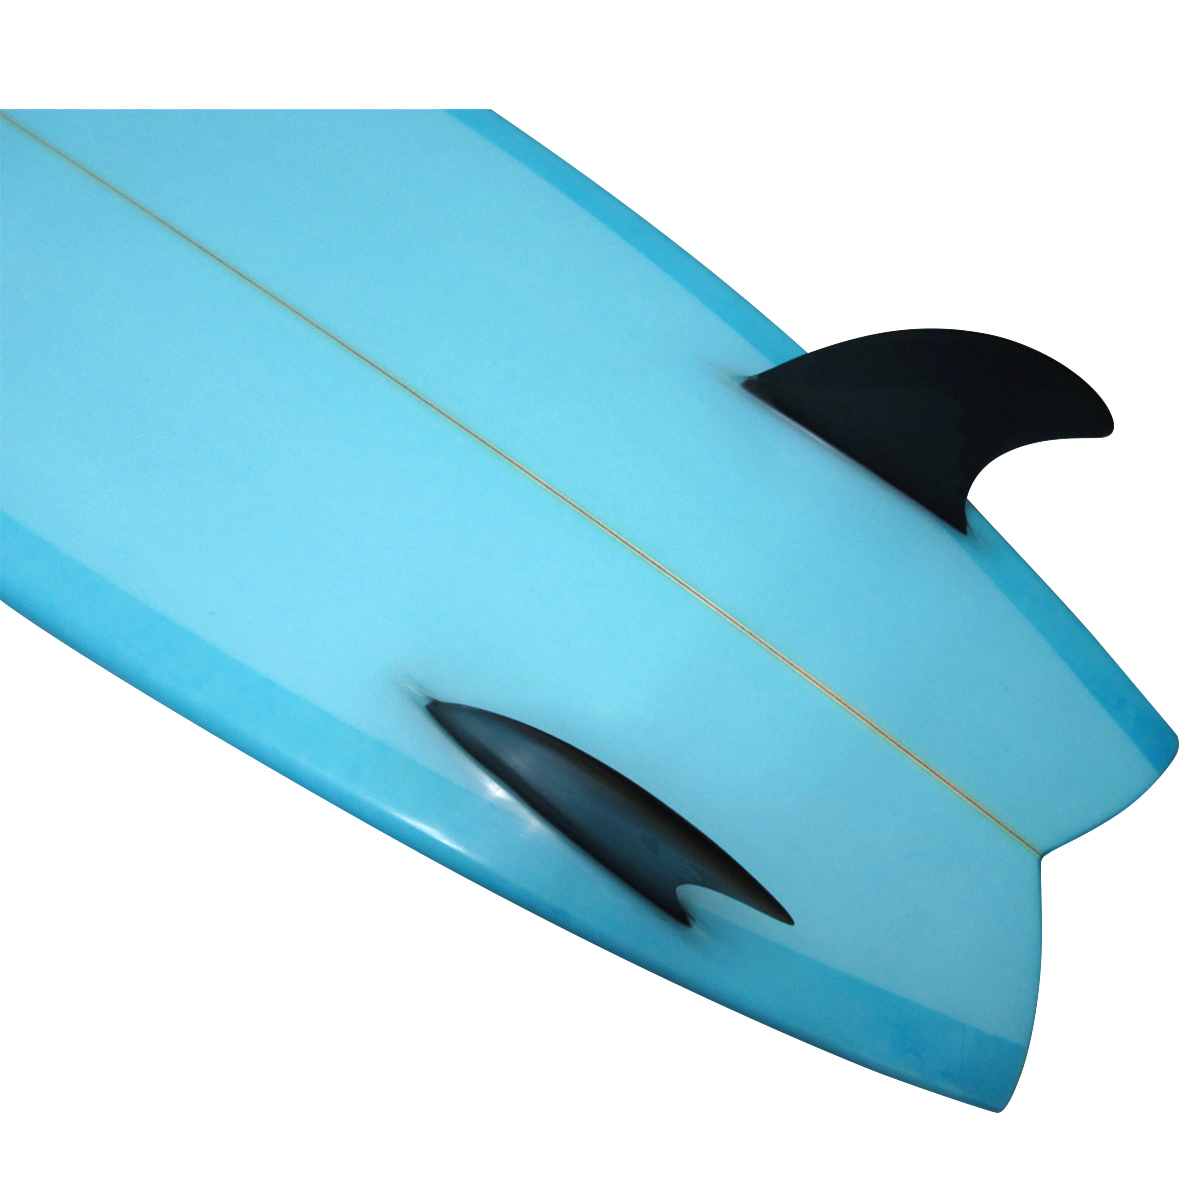 MS Surfboards / Moonlight Drive 5'10 Limited Edition x Afends x Hilux